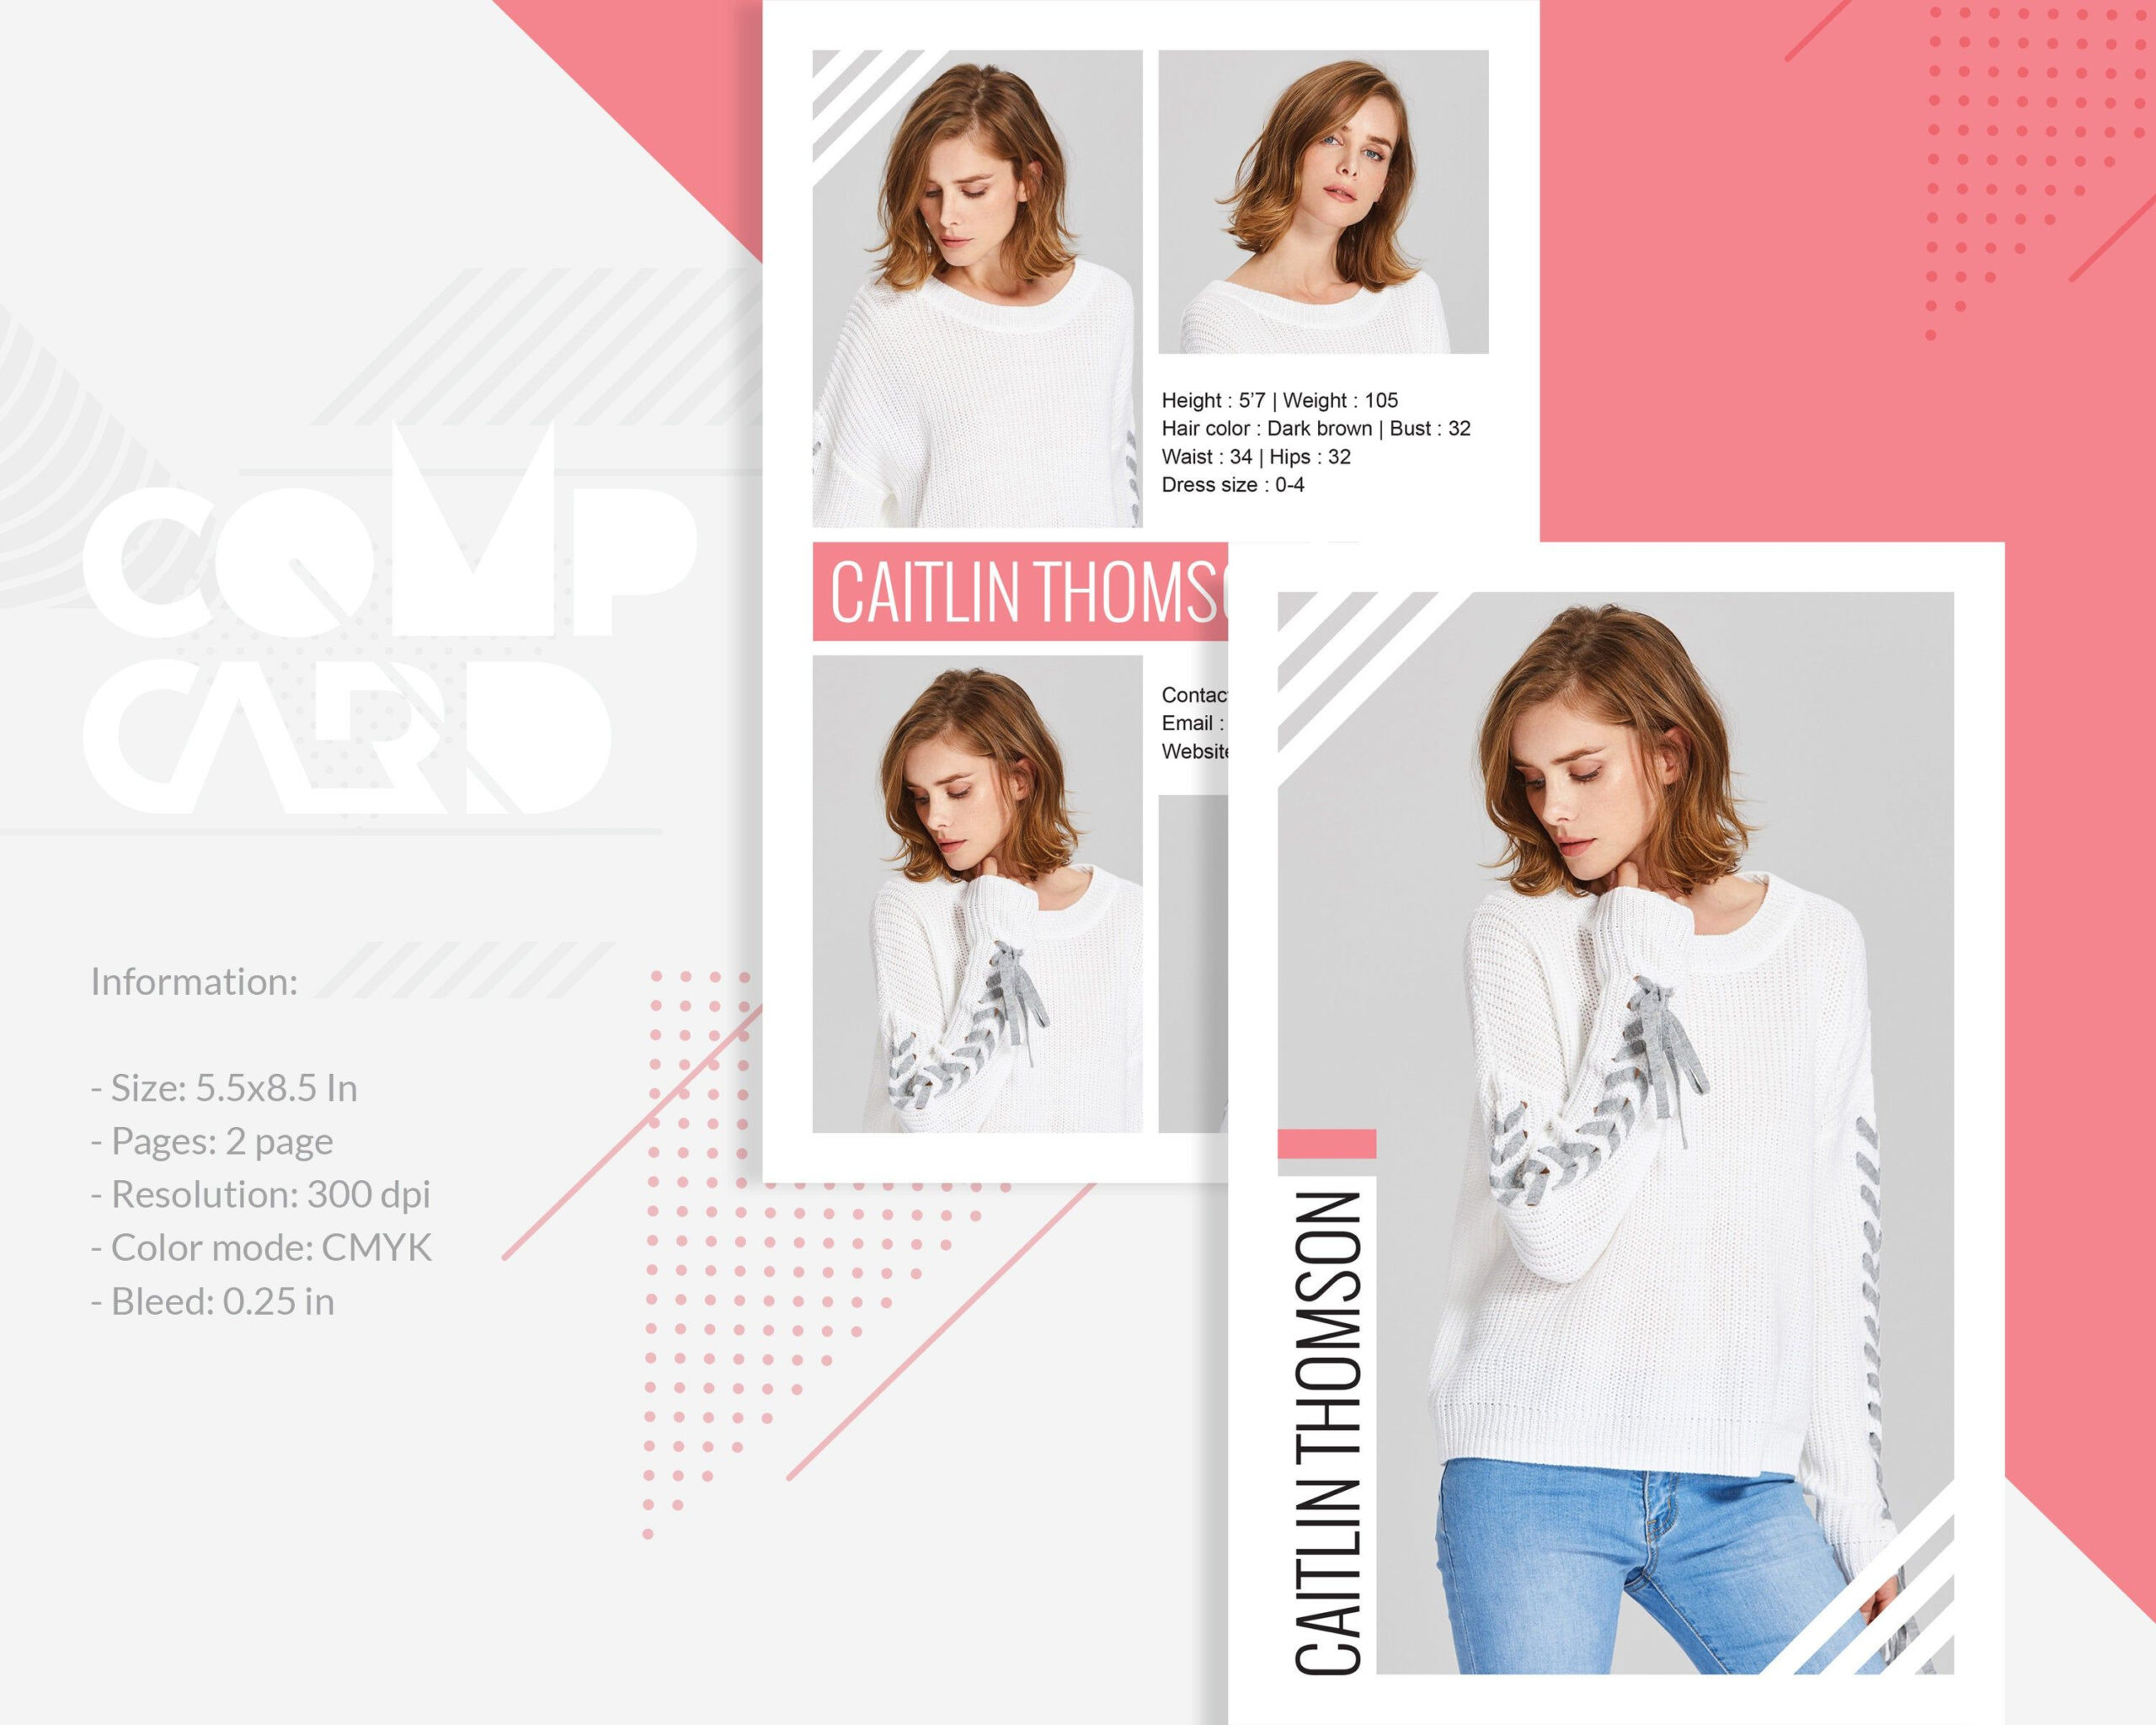 Modeling Comp Card | Fashion Model Comp Card Template Inside Comp Card Template Download